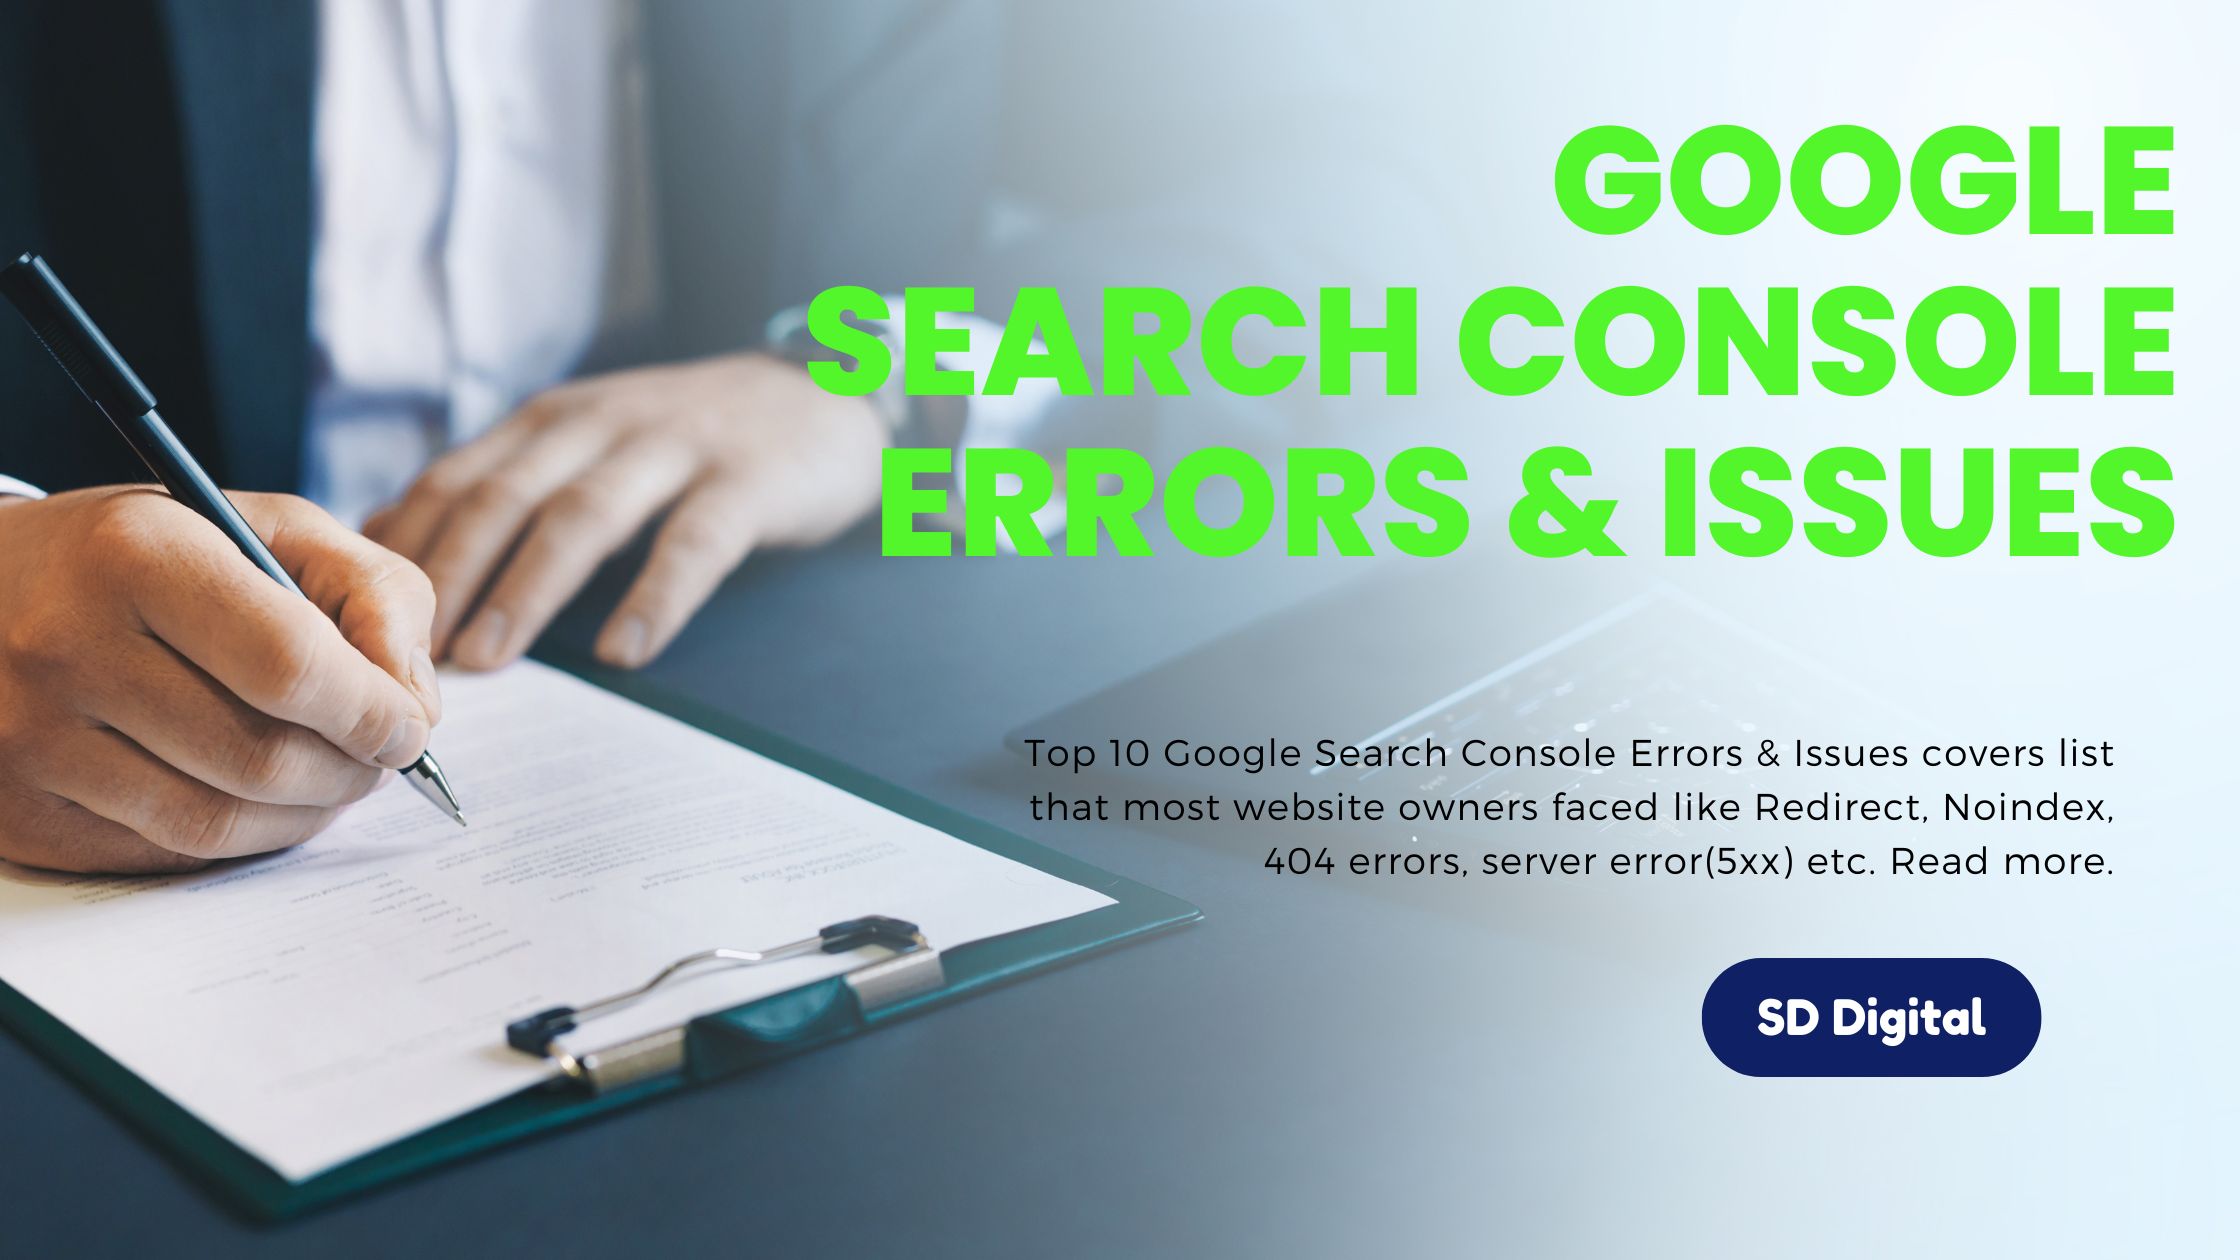 Top 10 Google Search Console Errors & Issues